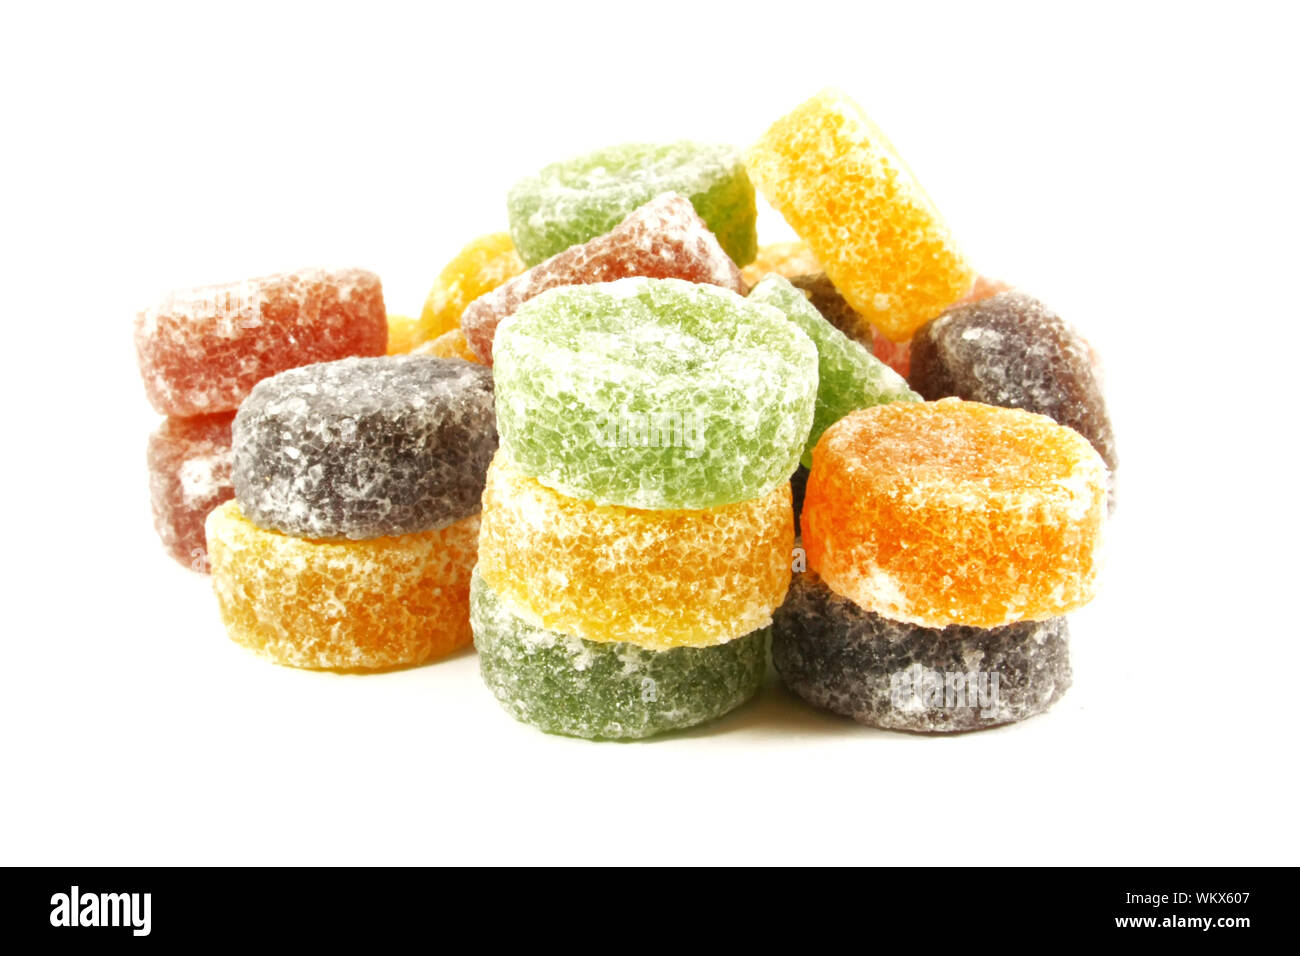 Pile of Candy Jelly Chews Stock Photo